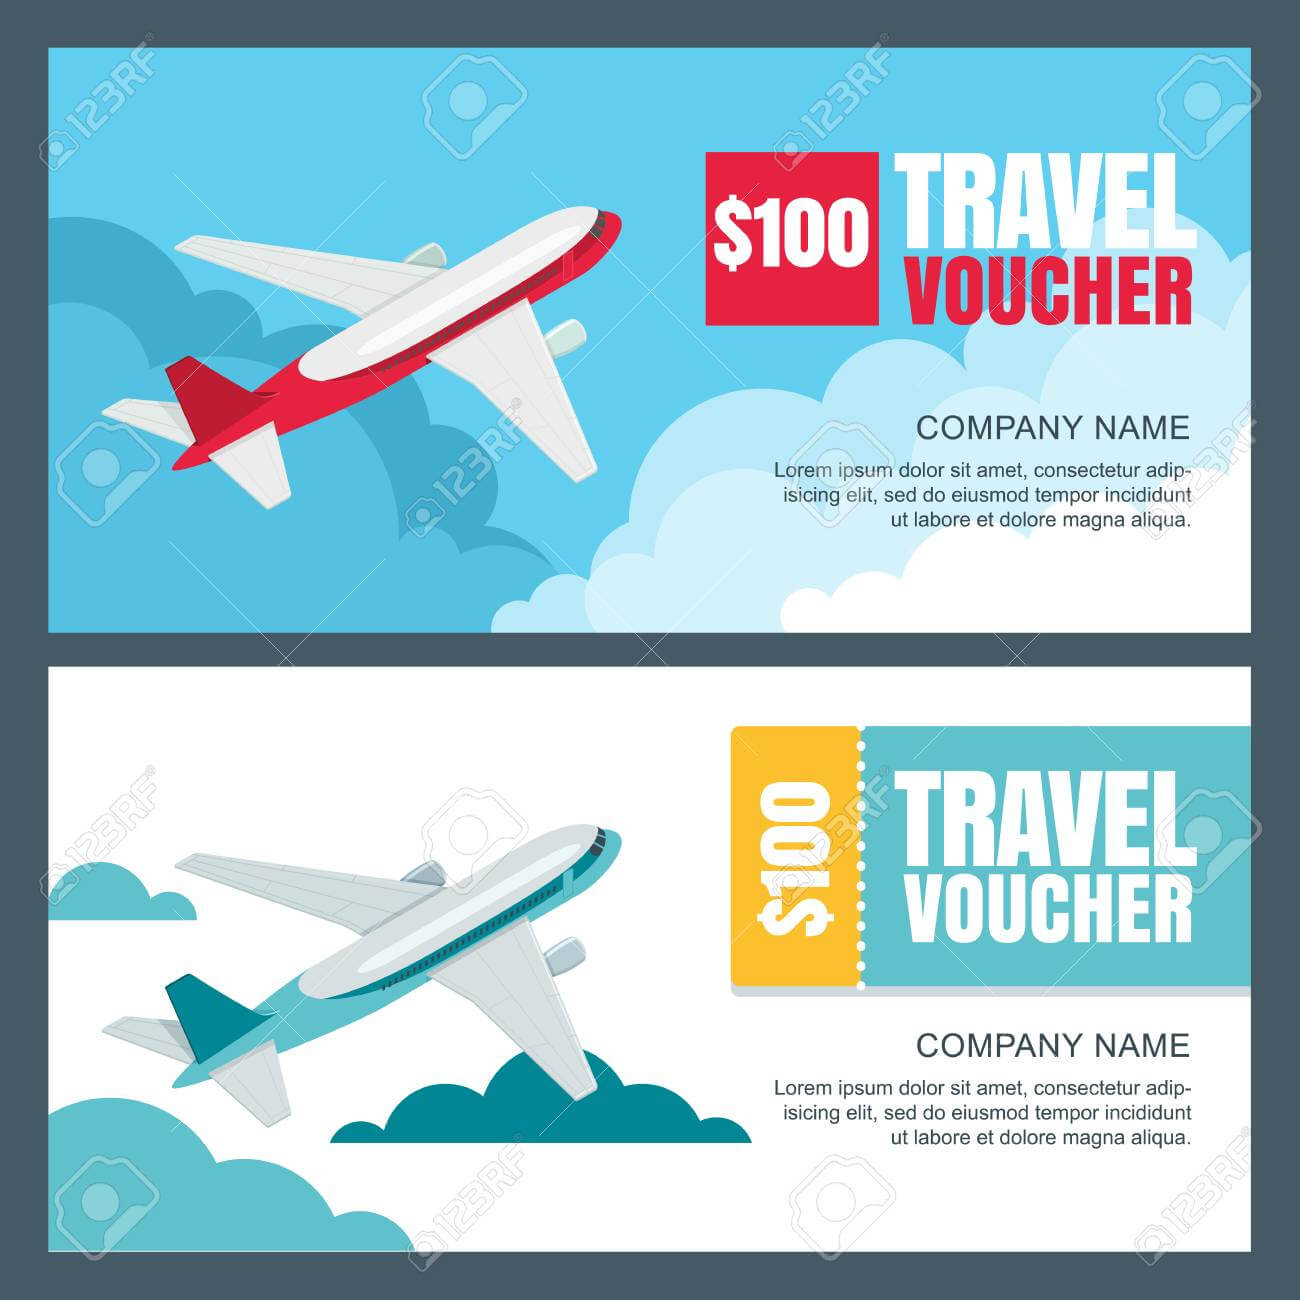 004 Template Ideas Travel Gift Certificate Vector Voucher With Free Travel Gift Certificate Template